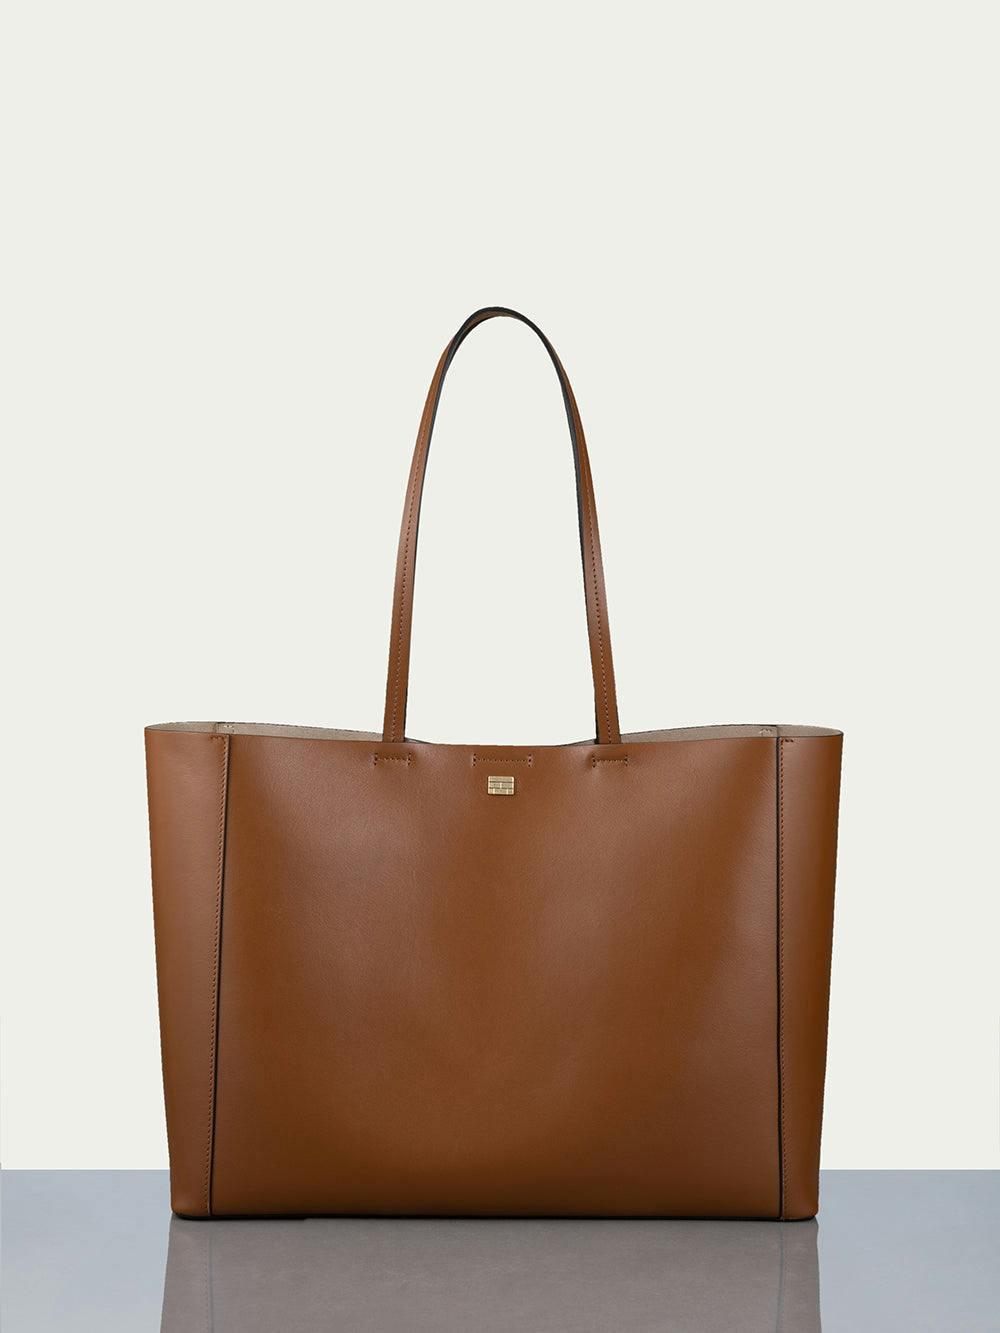 tote front view